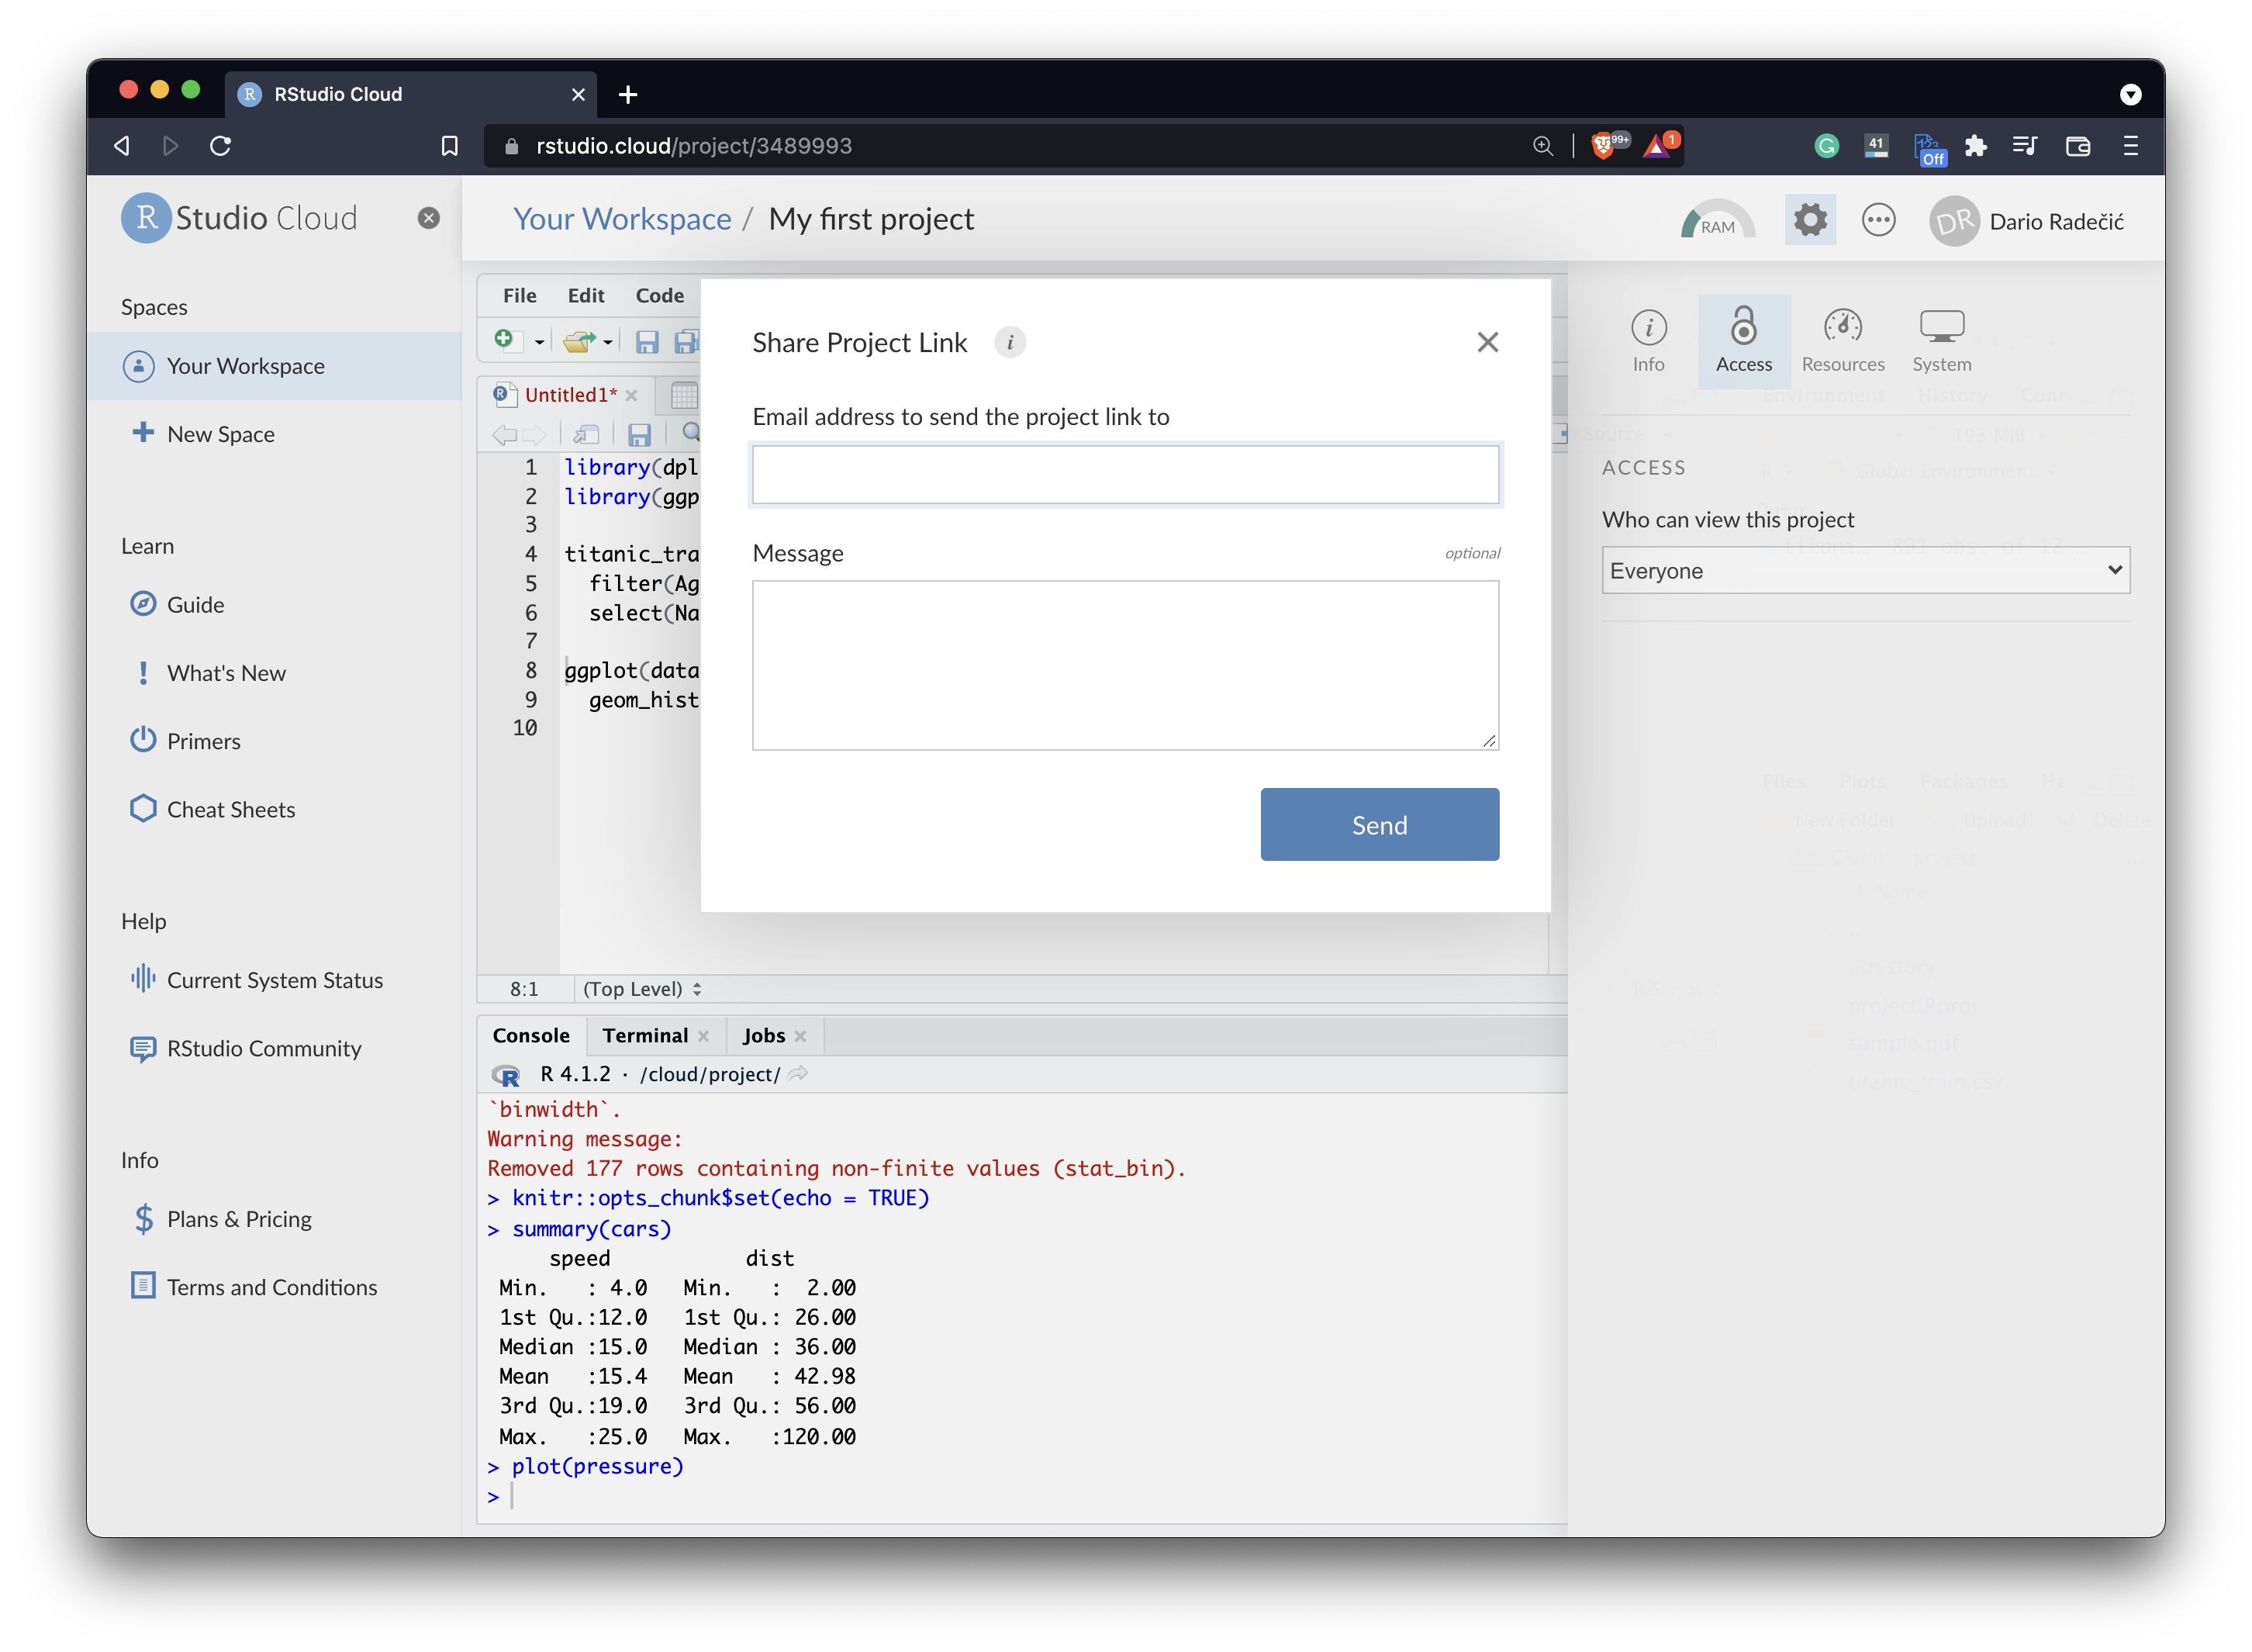 Image 20 - Inviting collaborators to an RStudio Cloud project